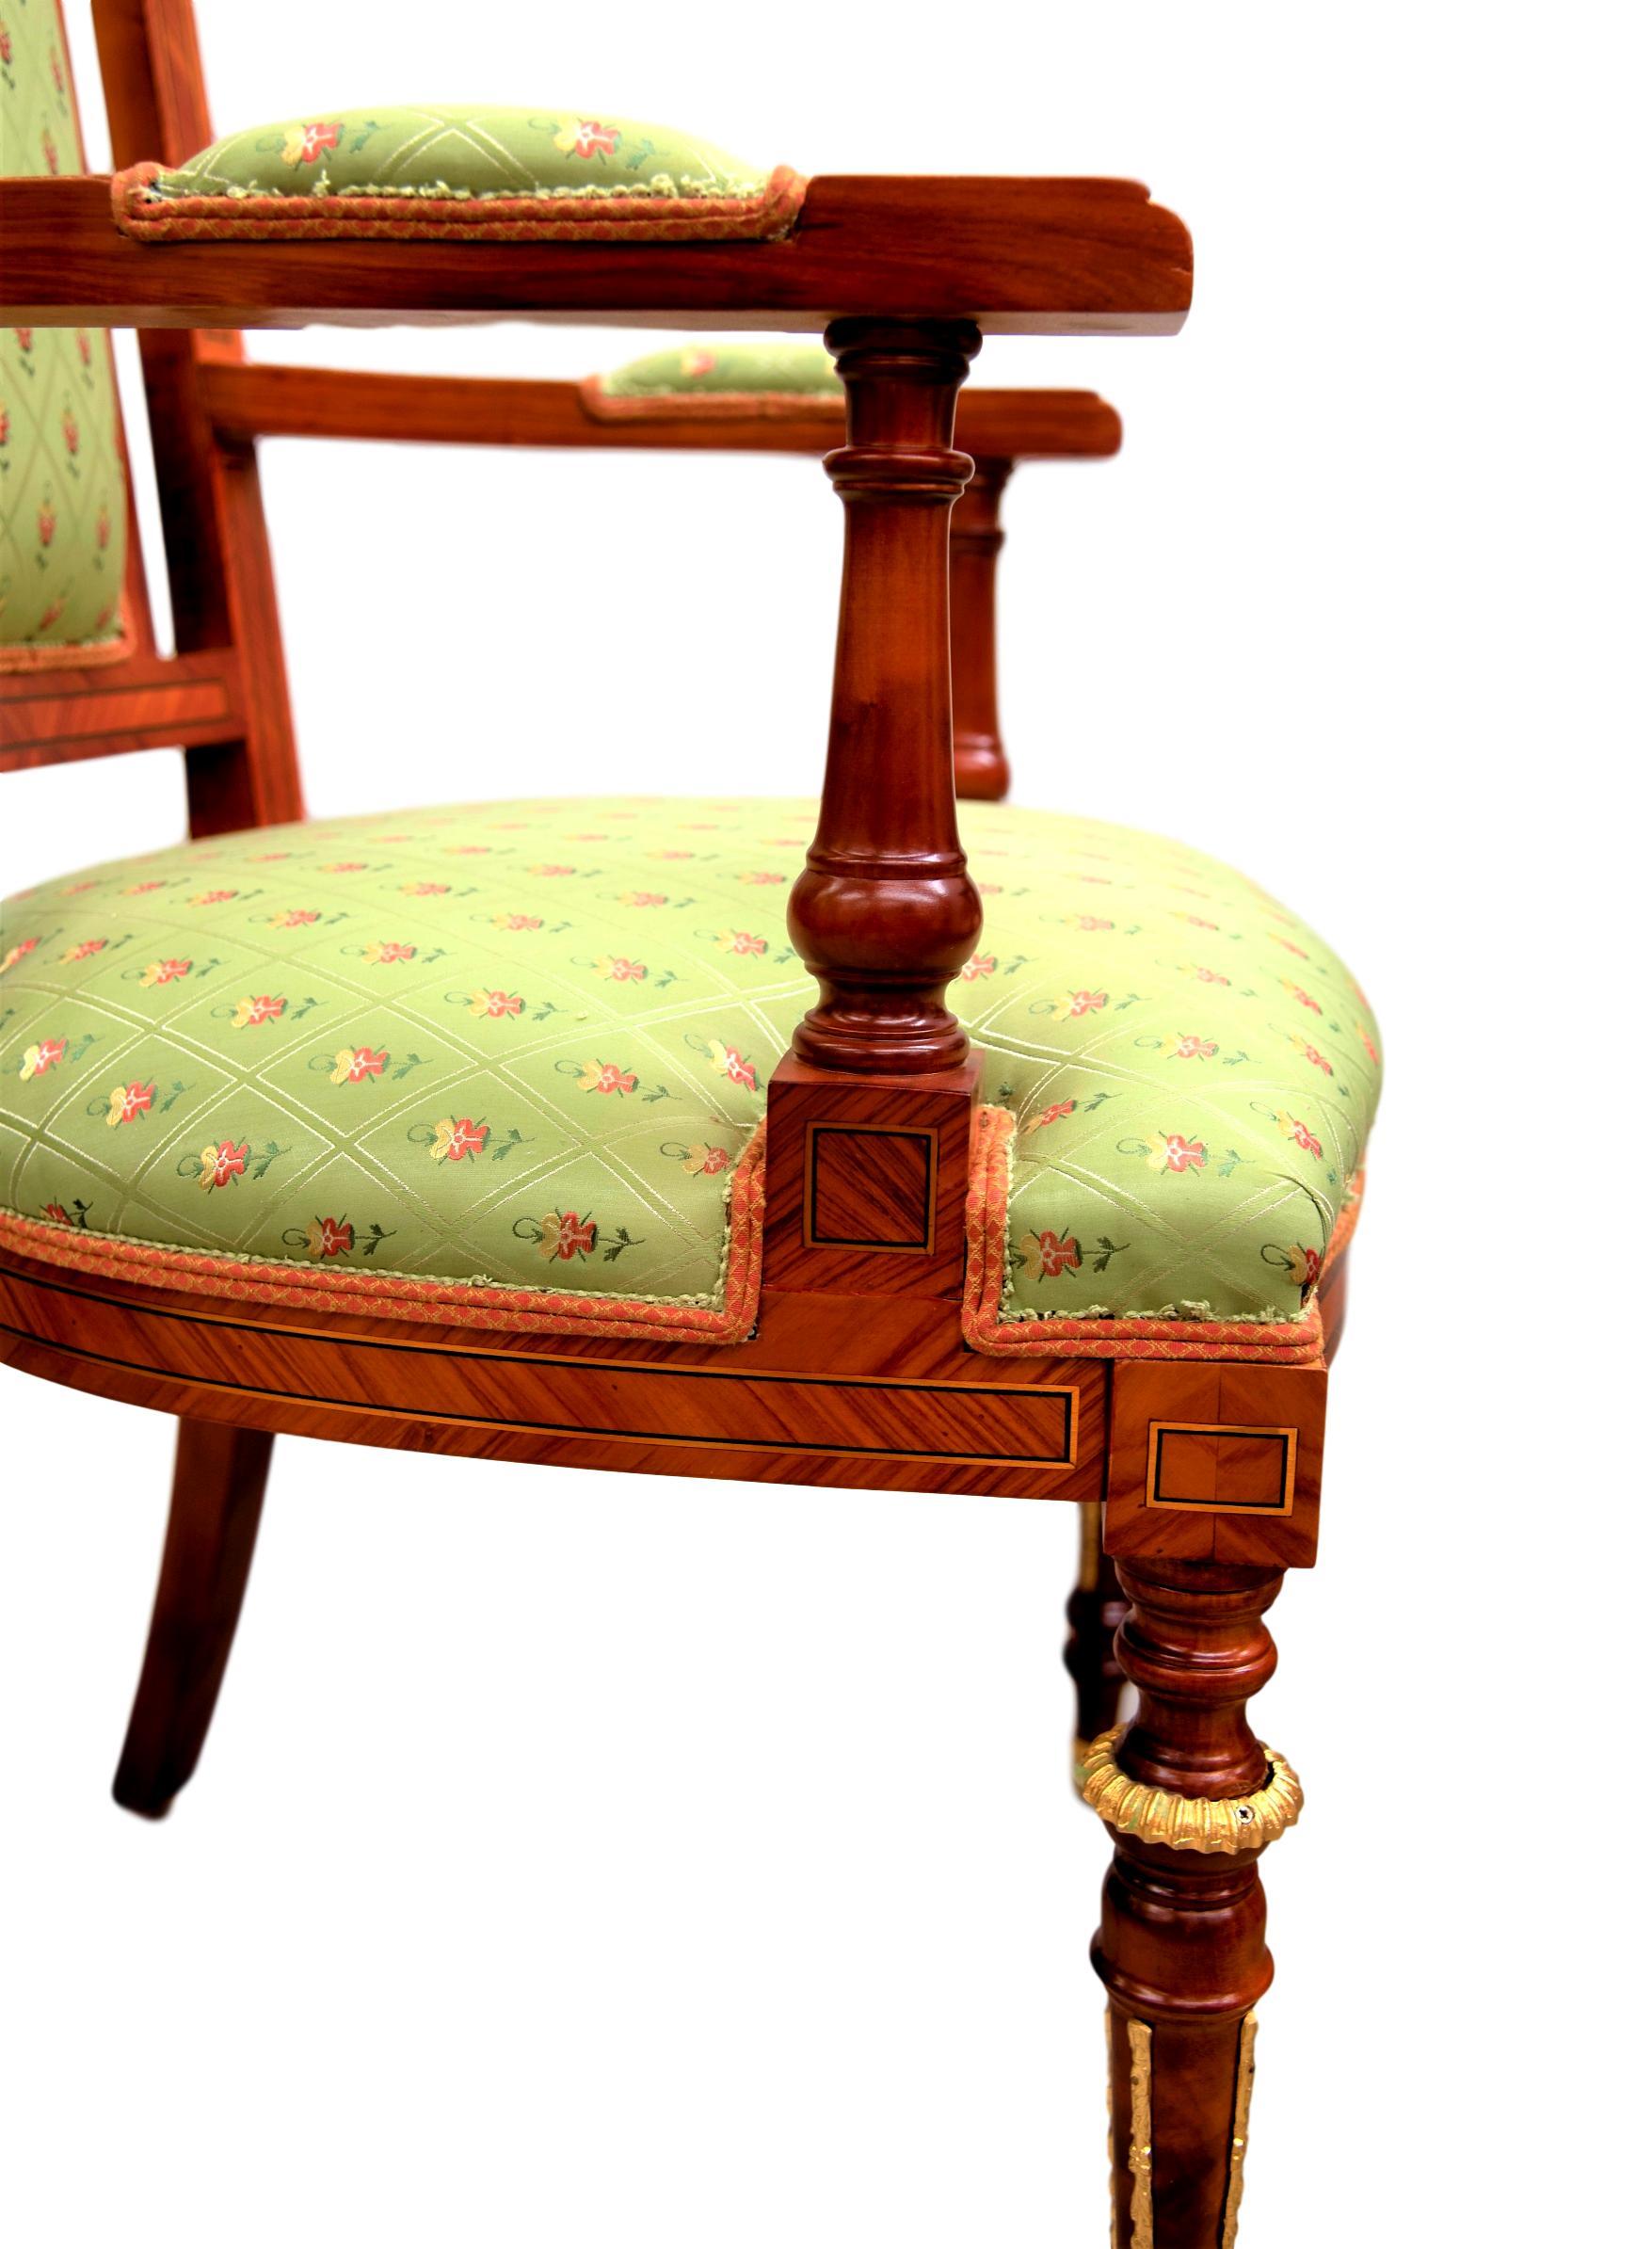 Neoclassical Set of 50 MiceVersailles Upholstered Rosewood Inlaid Gilt Bronze Dinner Chairs